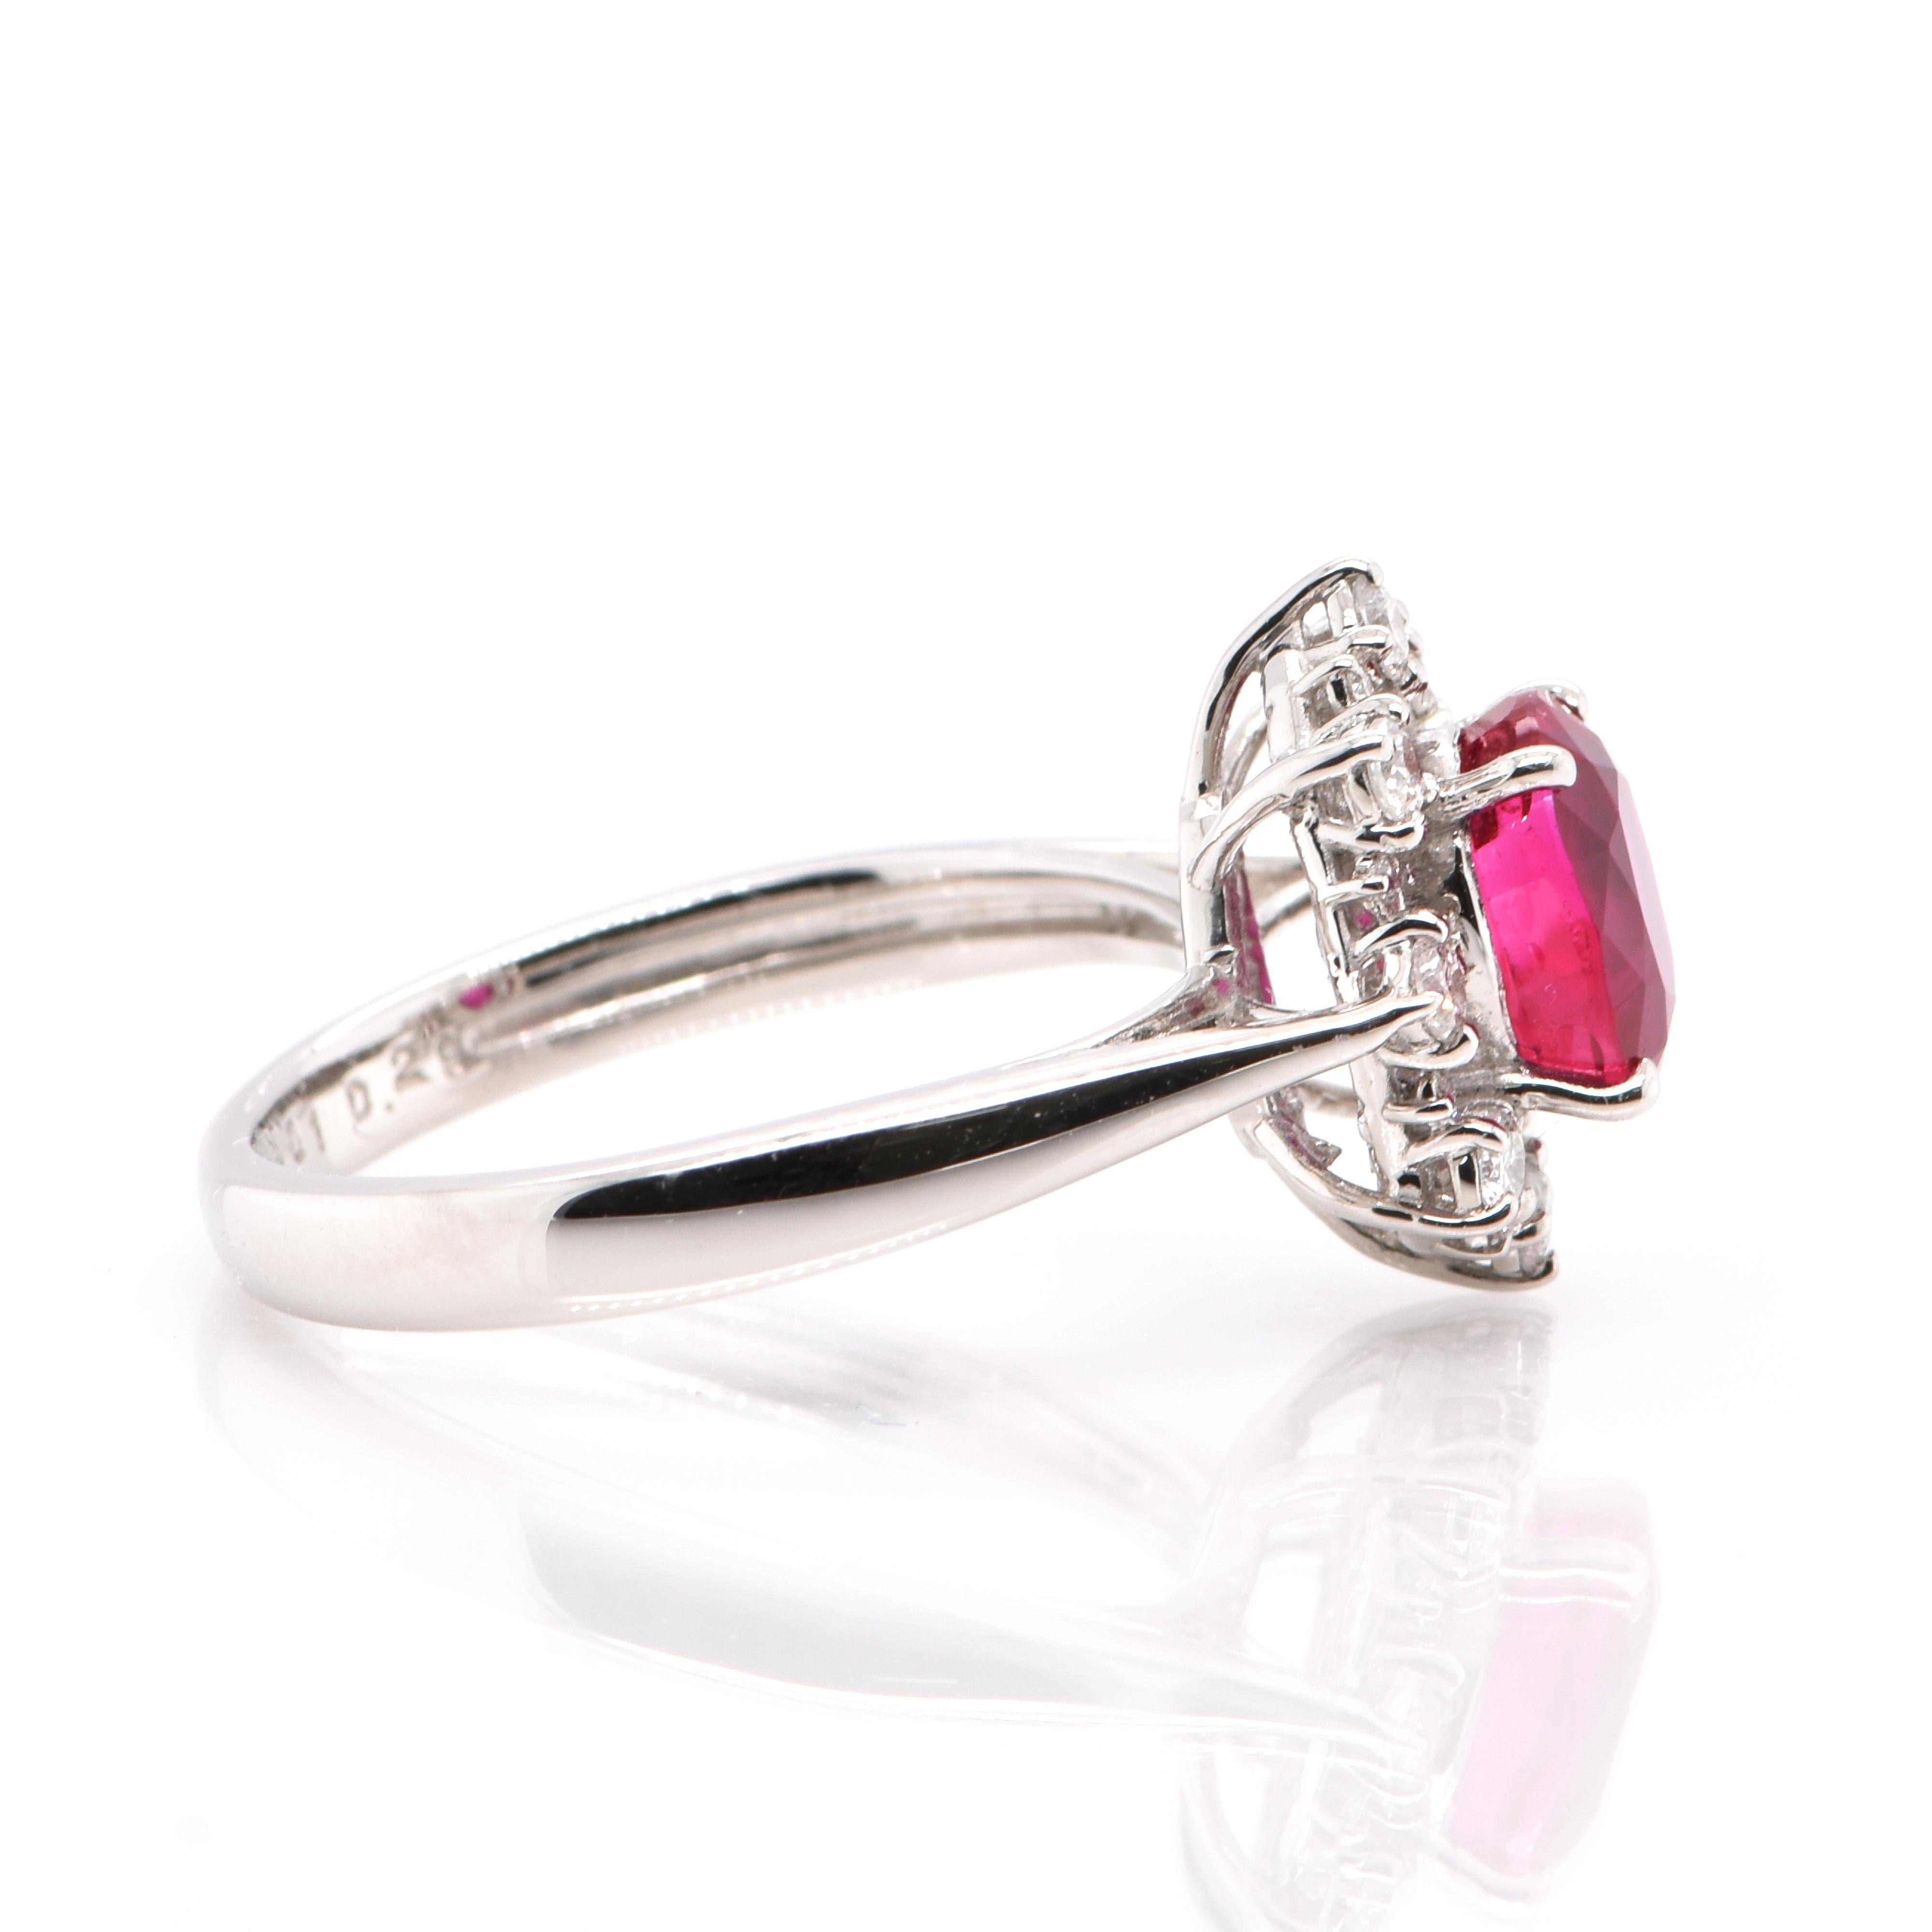 Oval Cut 2.01 Carat Natural Burmese Ruby Ring Set in Platinum Certified by GIA For Sale